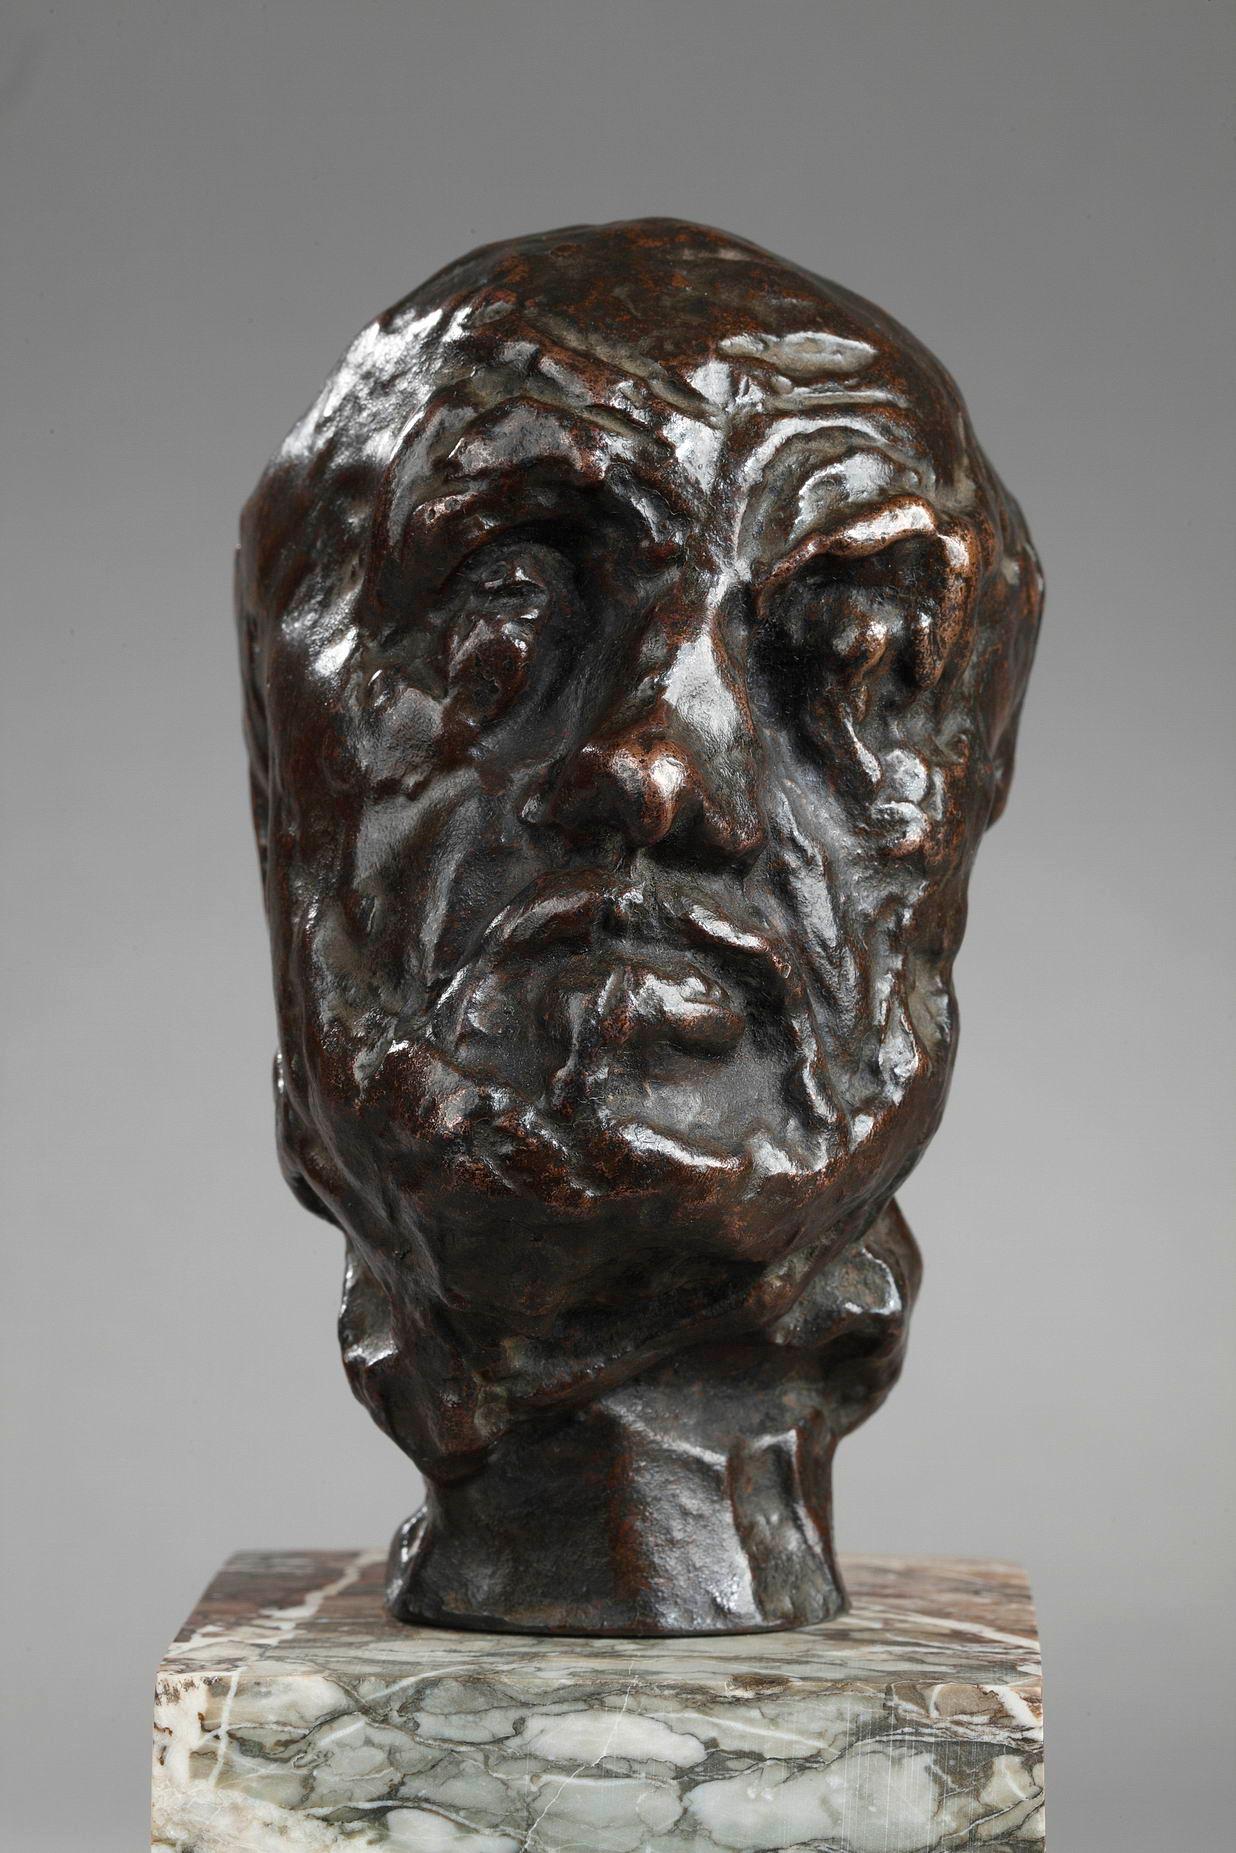 Small head of the Man with the broken nose - Sculpture by Auguste Rodin